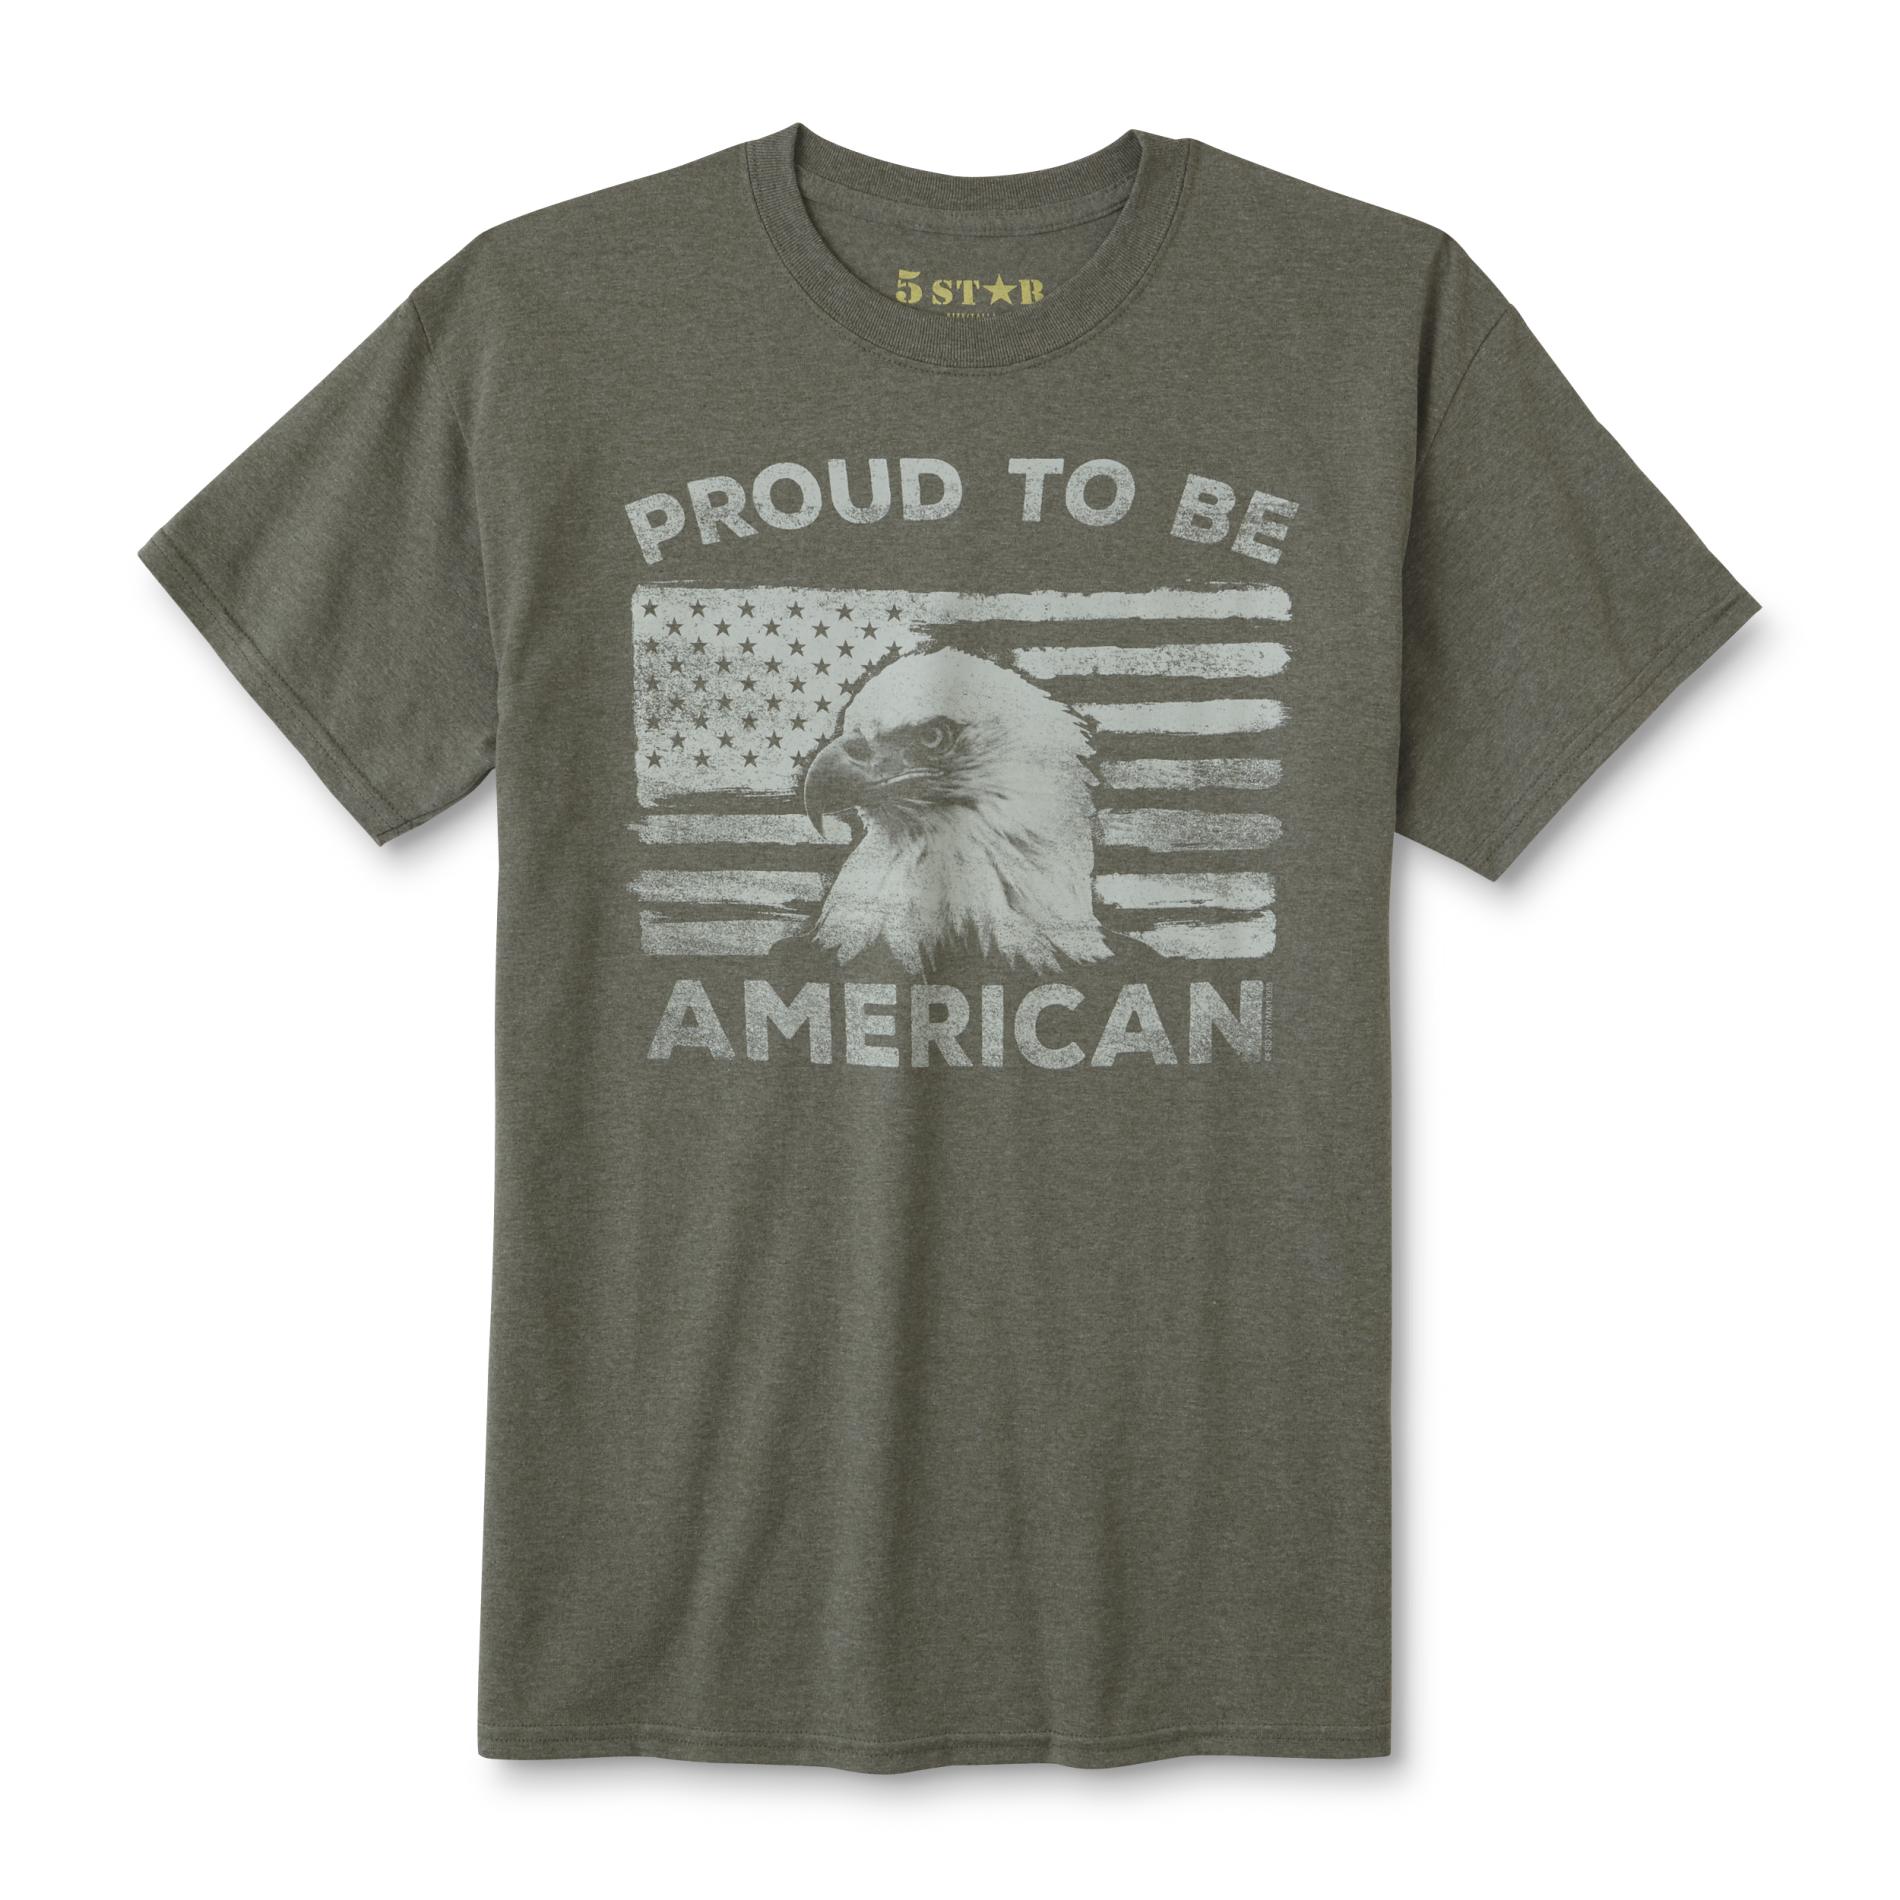 Men's Graphic T-Shirt - Proud to be American